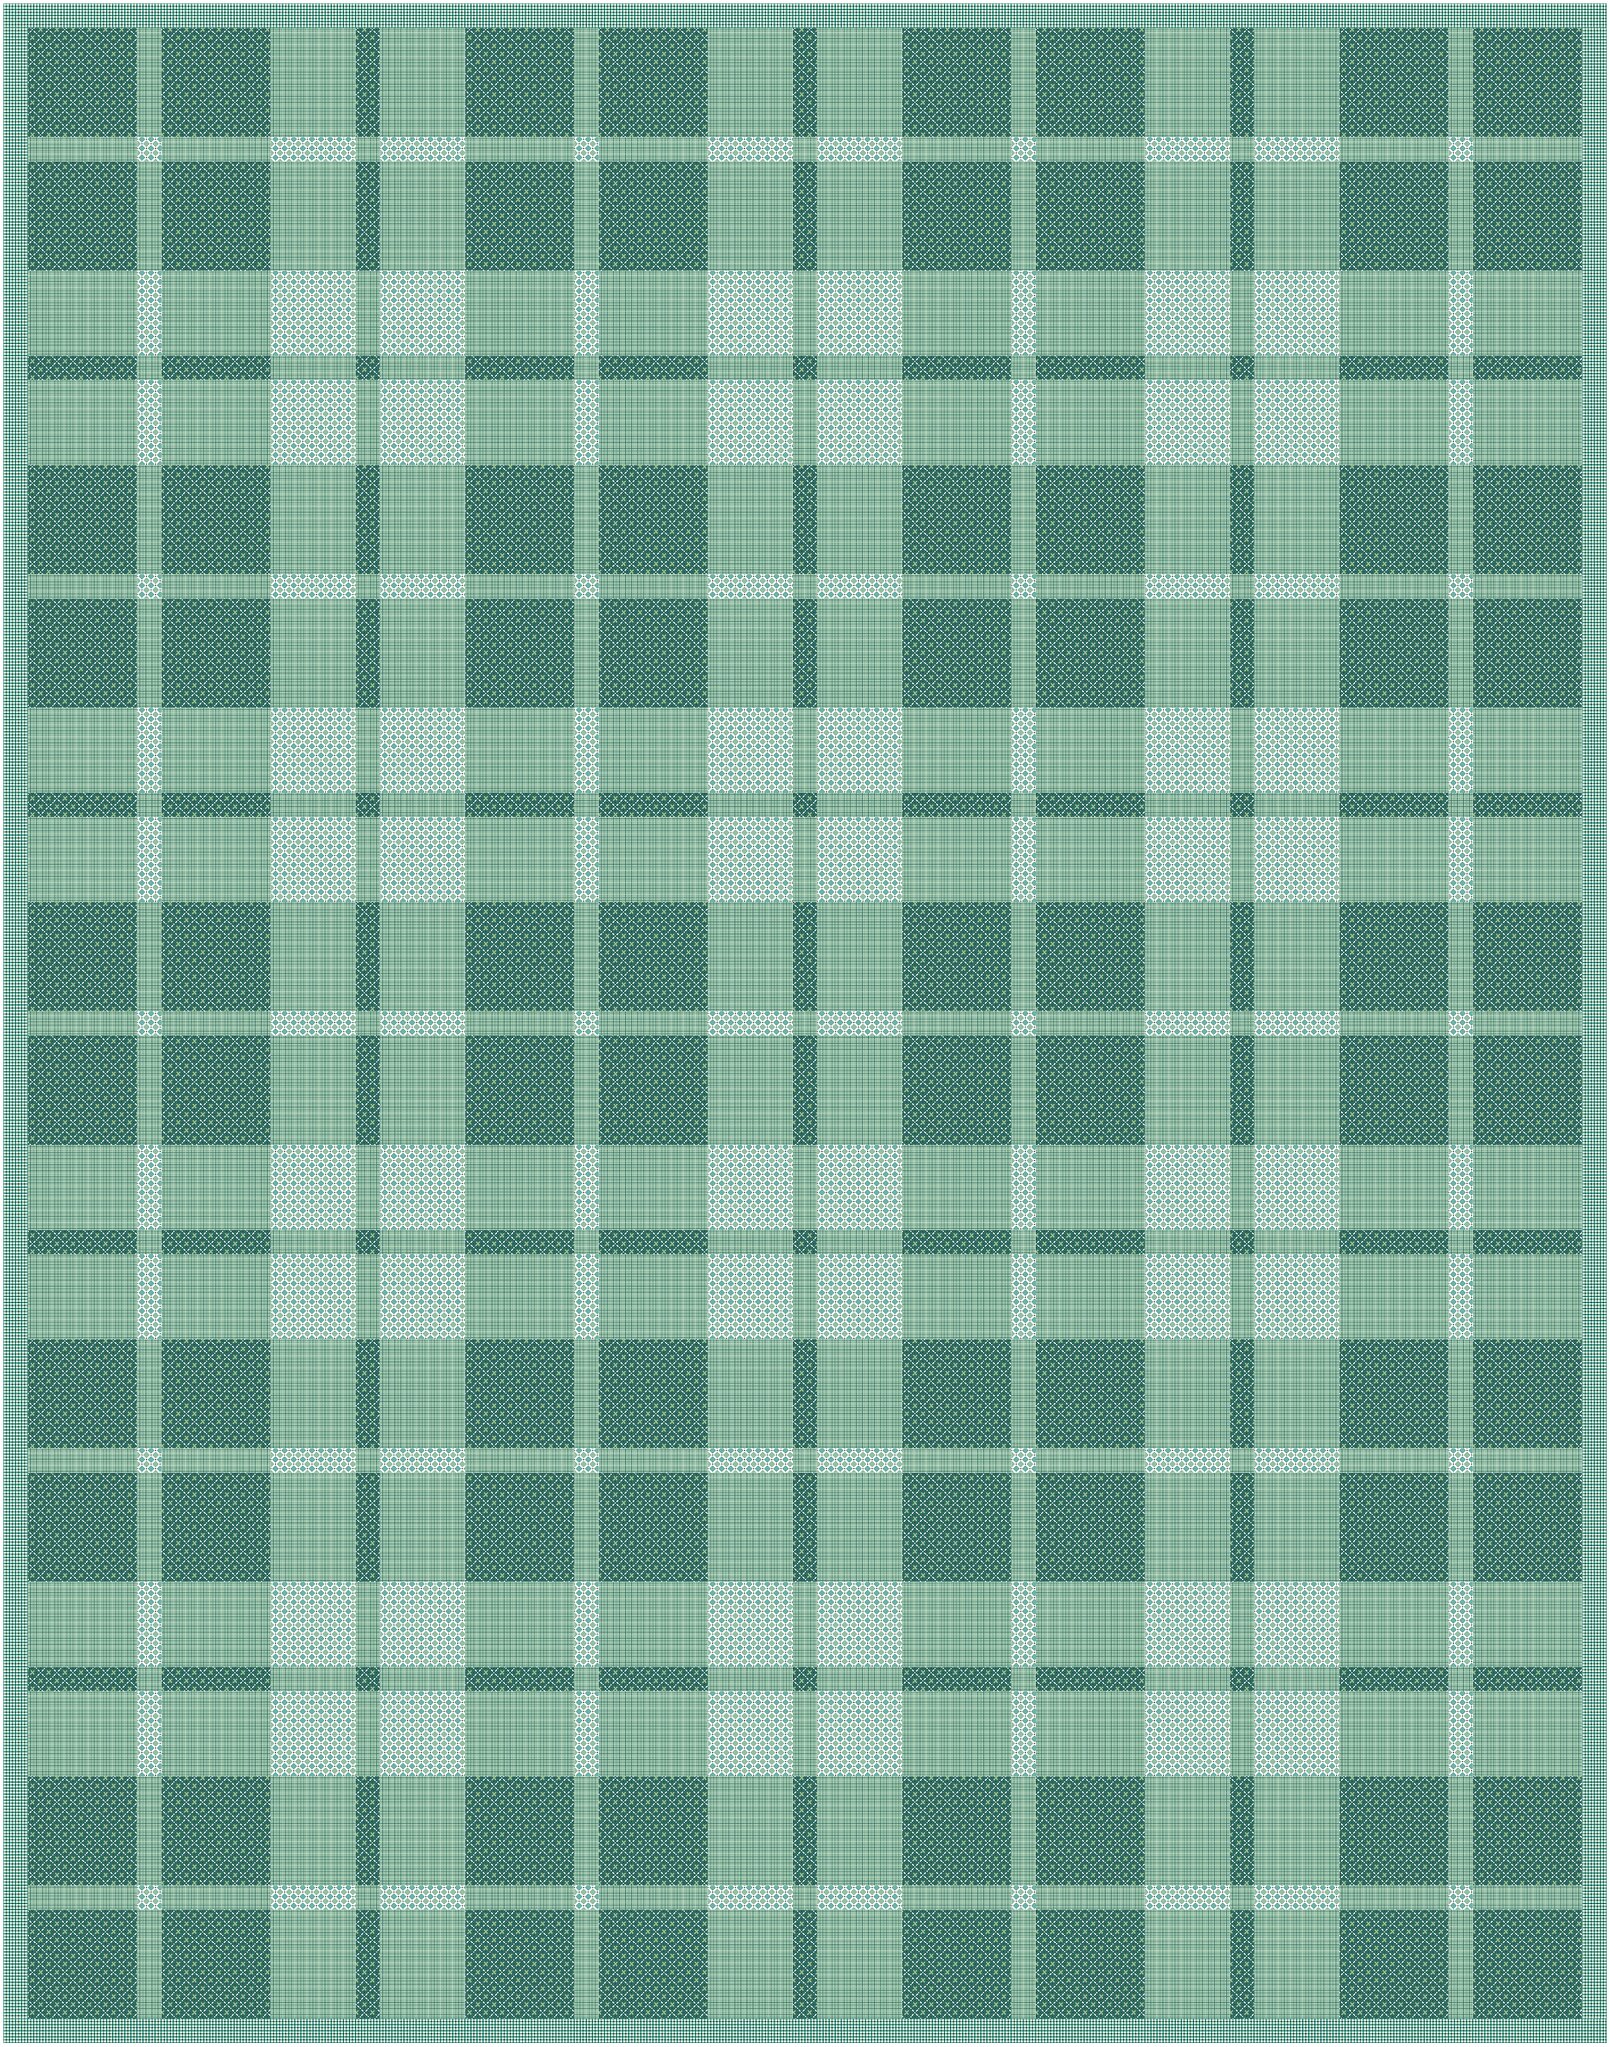 The Plaid-ish Quilt - Kitchen Table Quilting